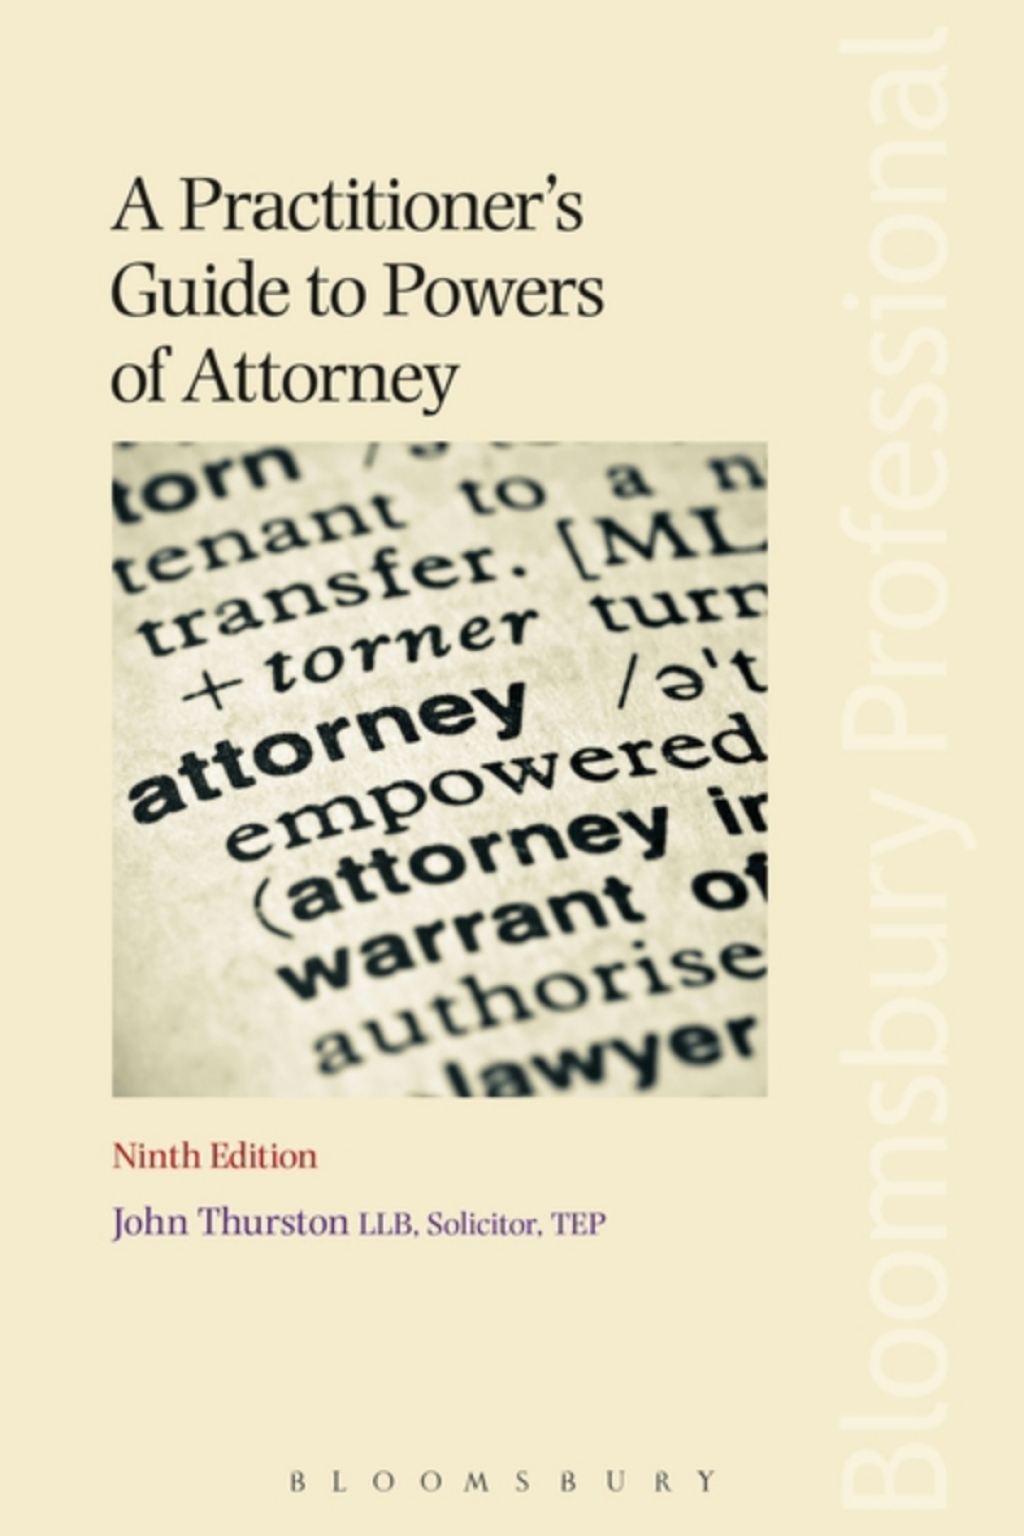 A Practitioner's Guide to Powers of Attorney - 9th Edition (eBook)